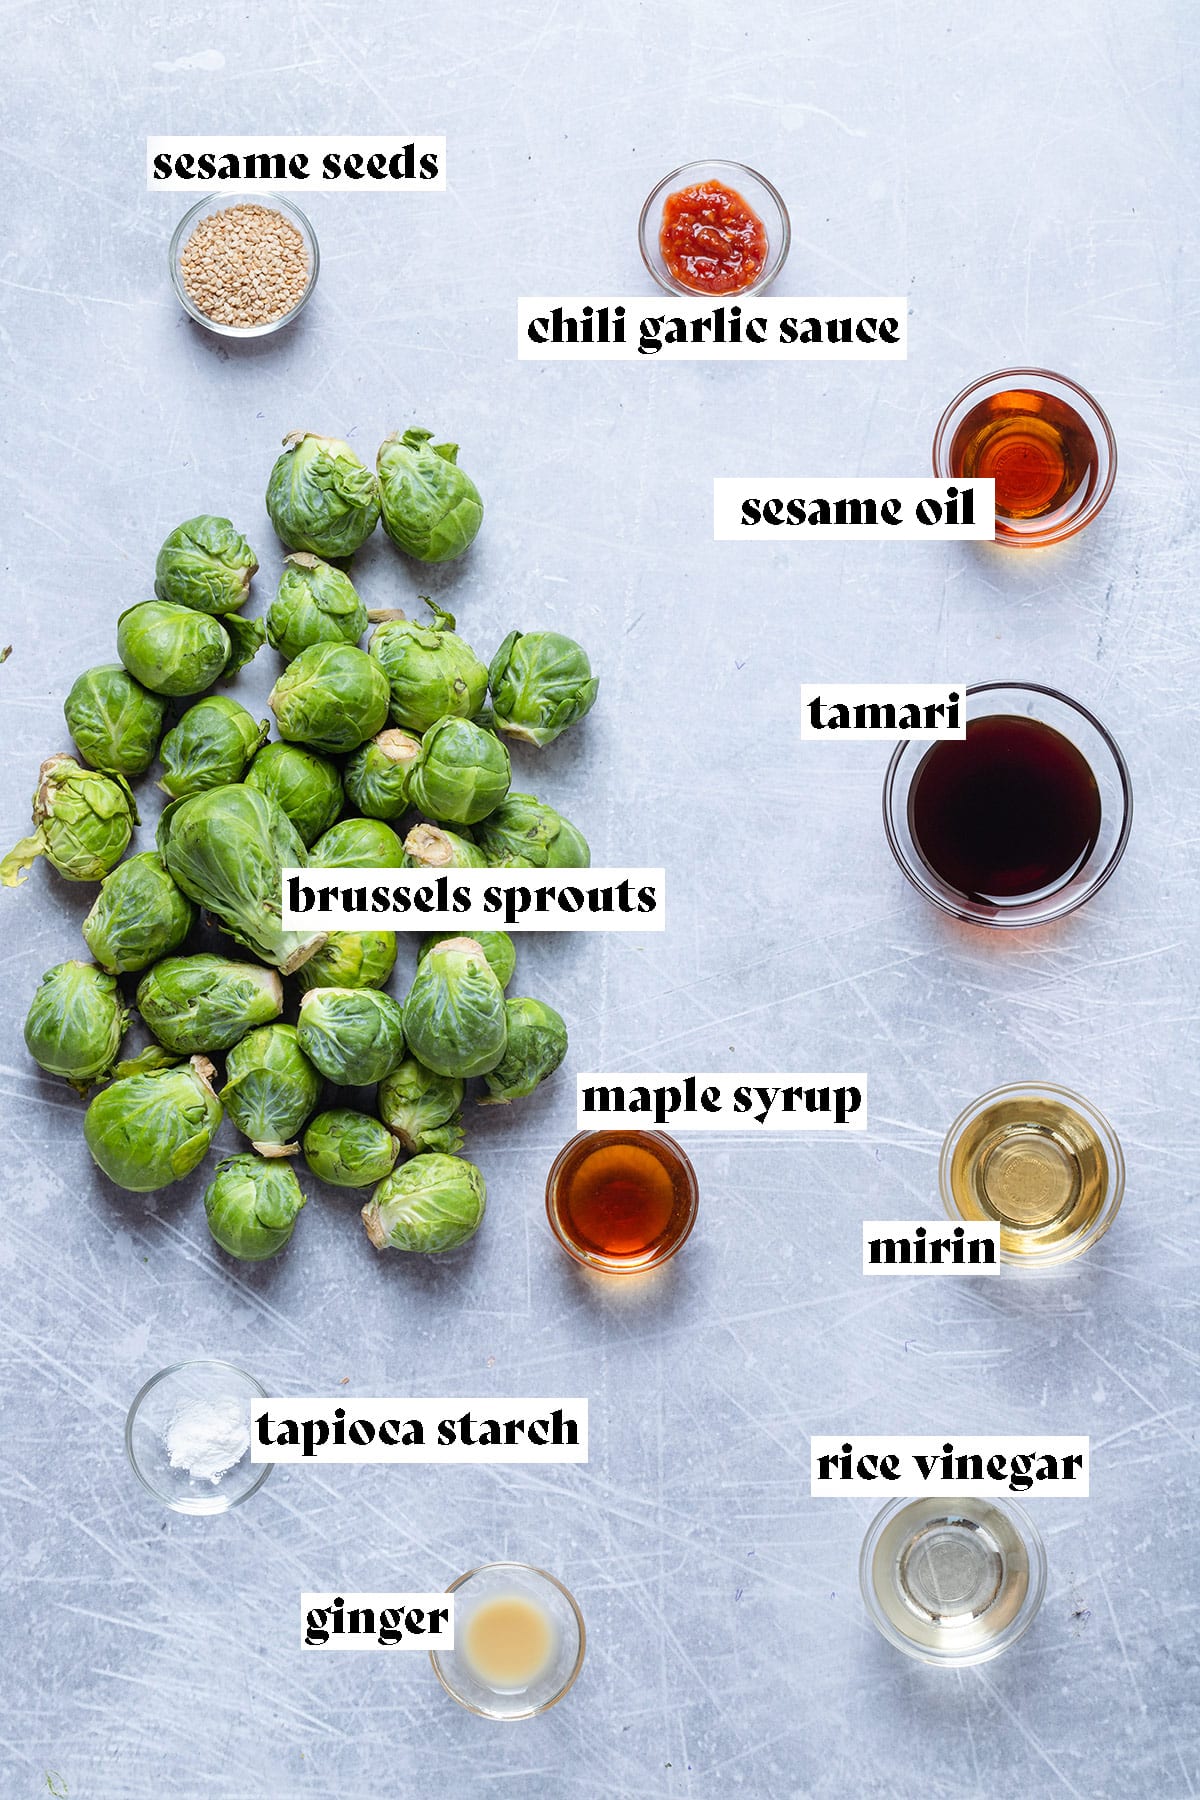 Raw brussels sprouts, tamari, maple syrup, mirin, rice vinegar, and other ingredients on a grey background.